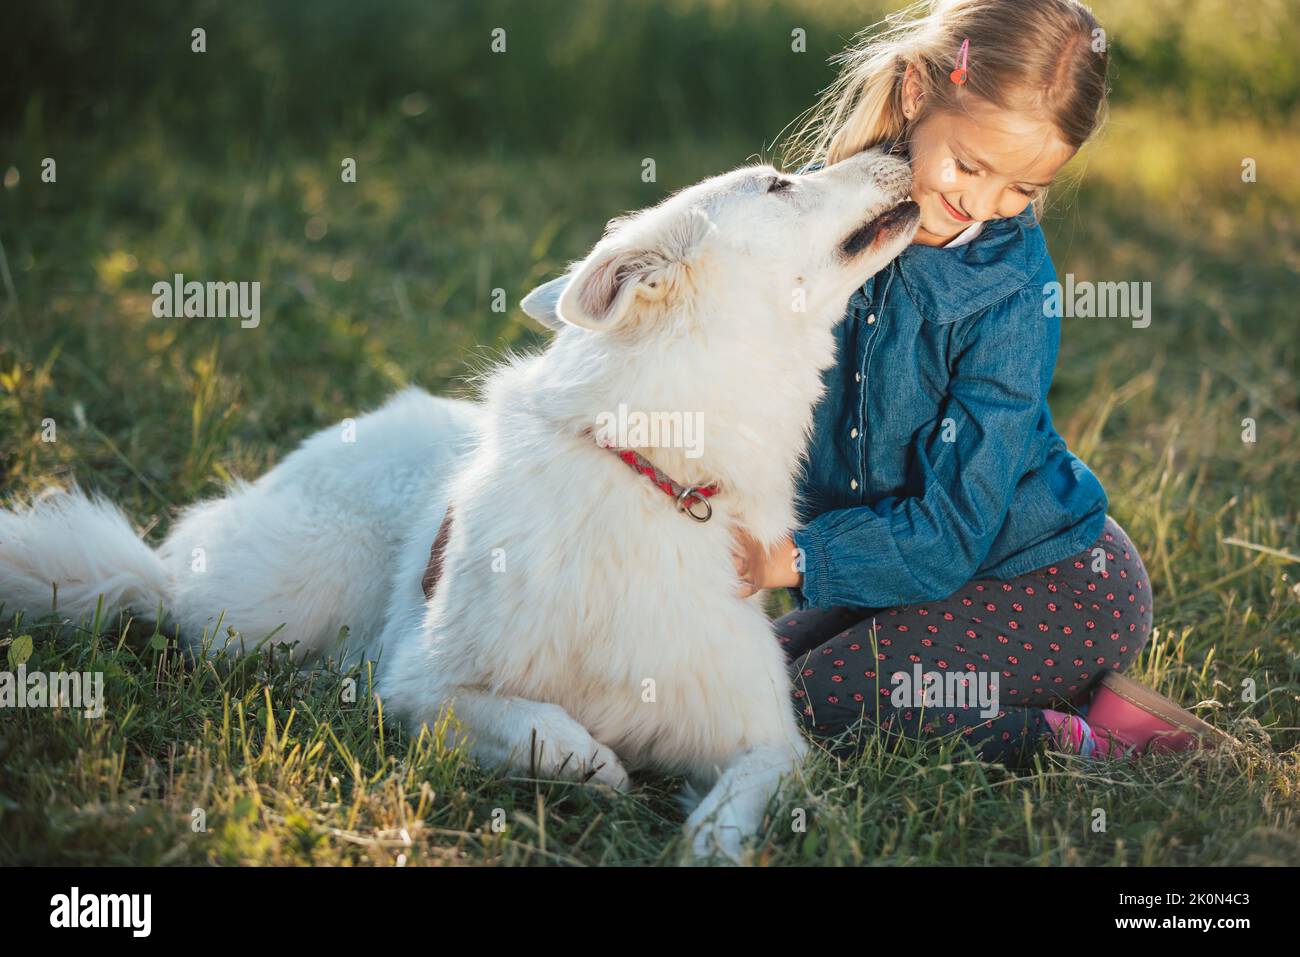 Beautiful white dog and sweet little girl, playing in the yard, a pet kissing a smiling child by licking her face Stock Photo